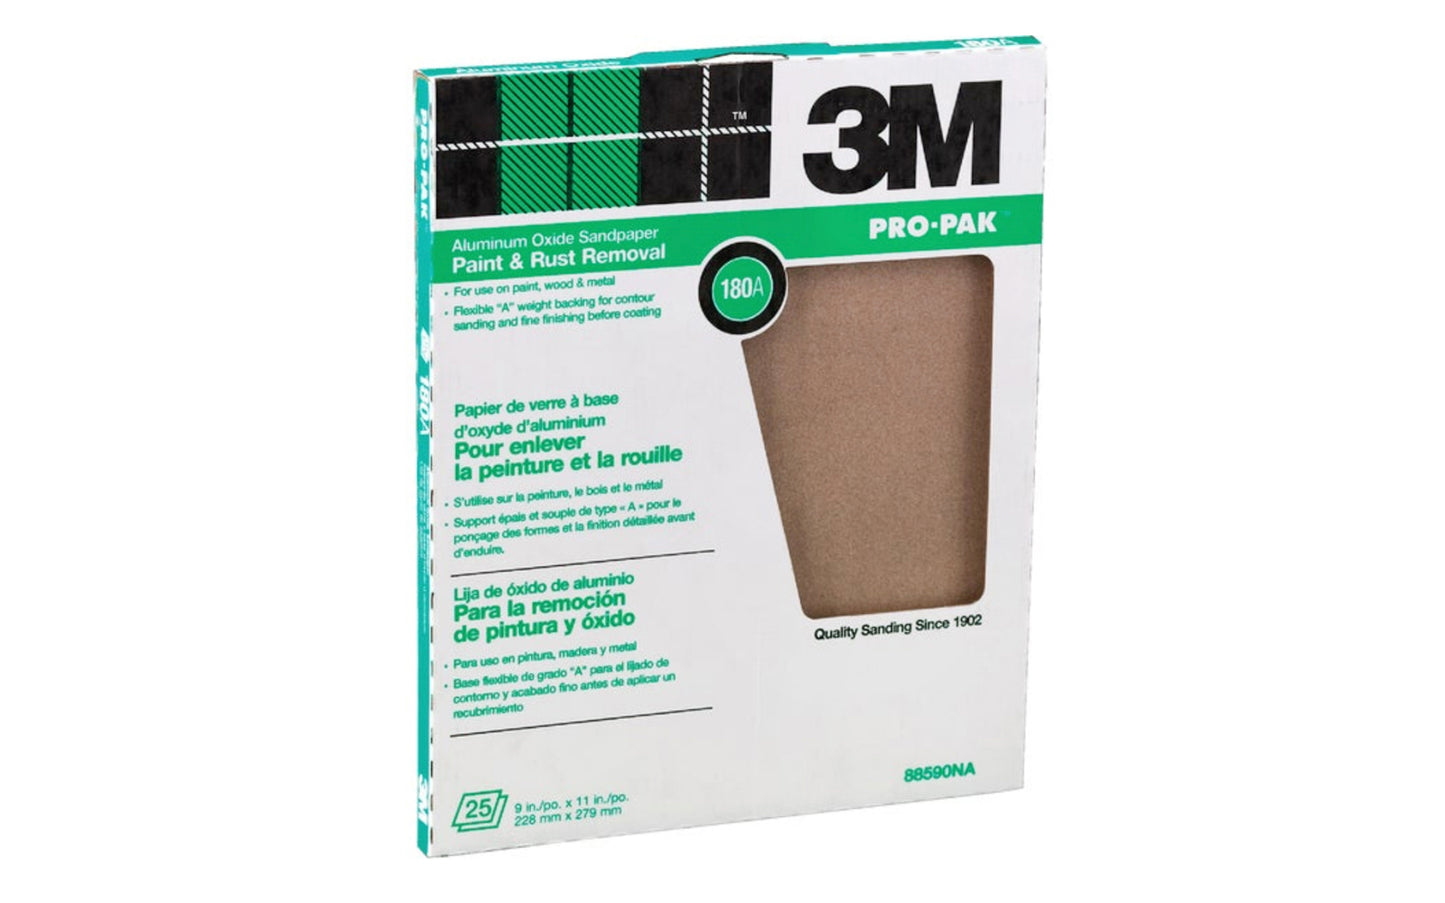 3M Aluminum Oxide Sandpaper 180 Grit - 25 Sheets. All-purpose aluminum oxide abrasive for home & shop use. Open coated sheets for wood and metal sanding. 3M Model 88590NA.  Made in Canada.